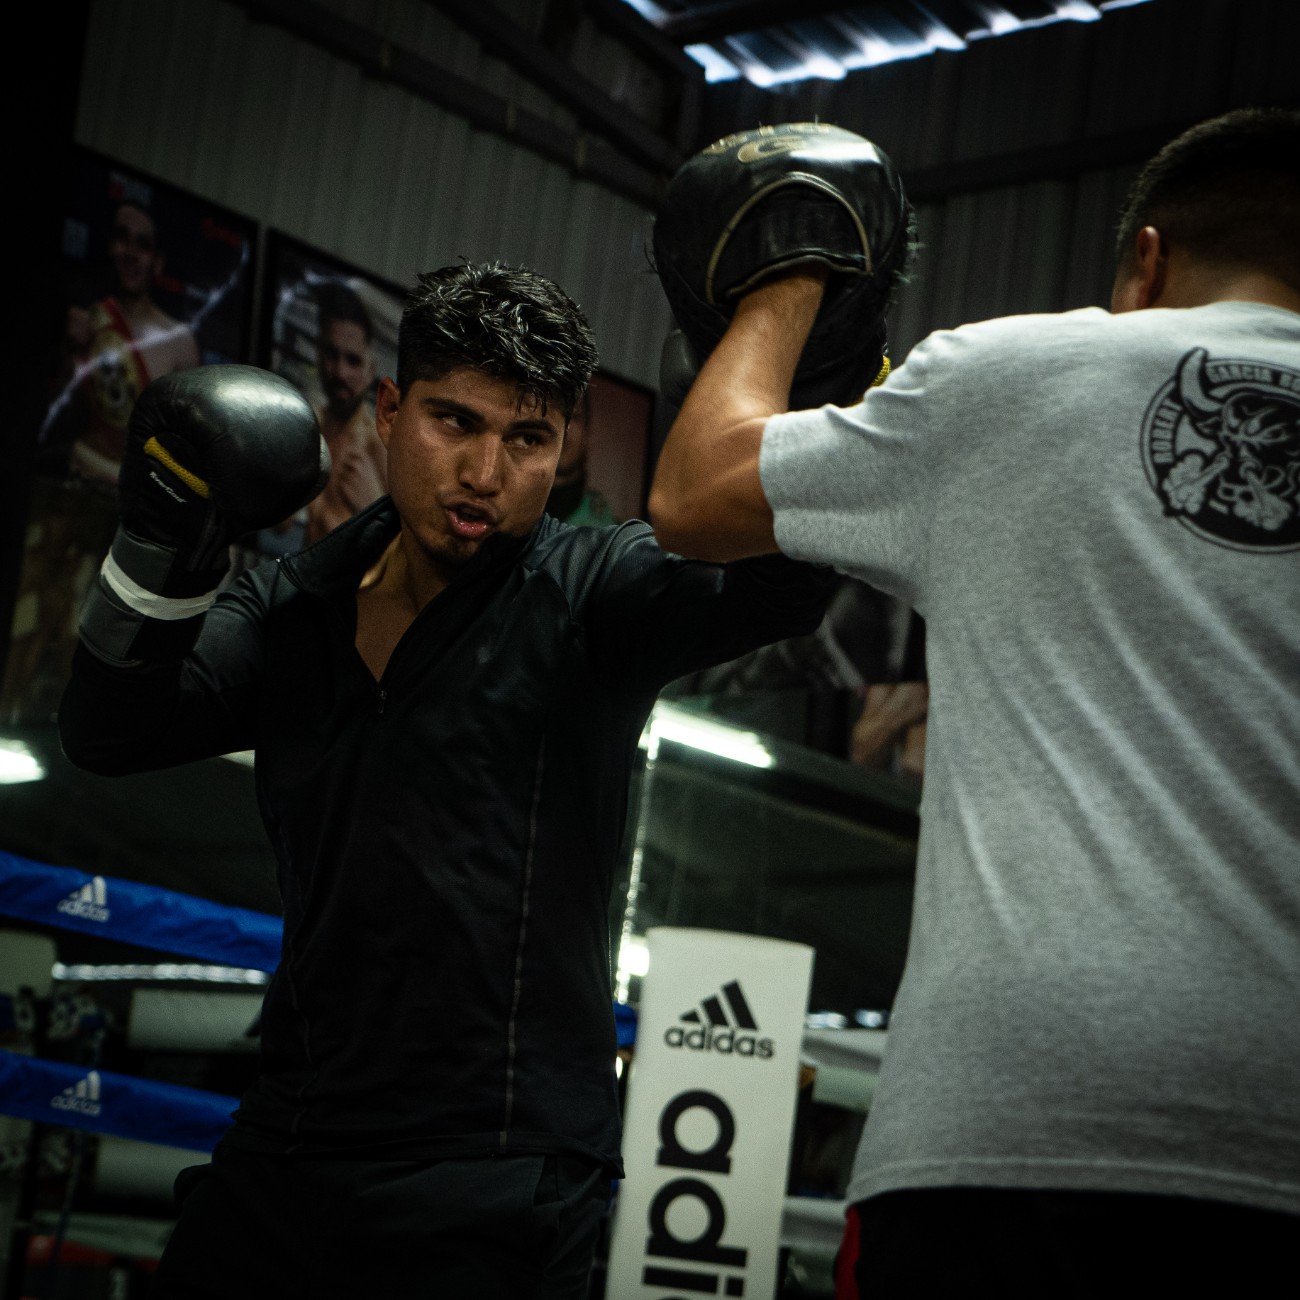 Manny Pacquiao, Mikey Garcia, Vergil Ortiz Jr boxing photo and news image